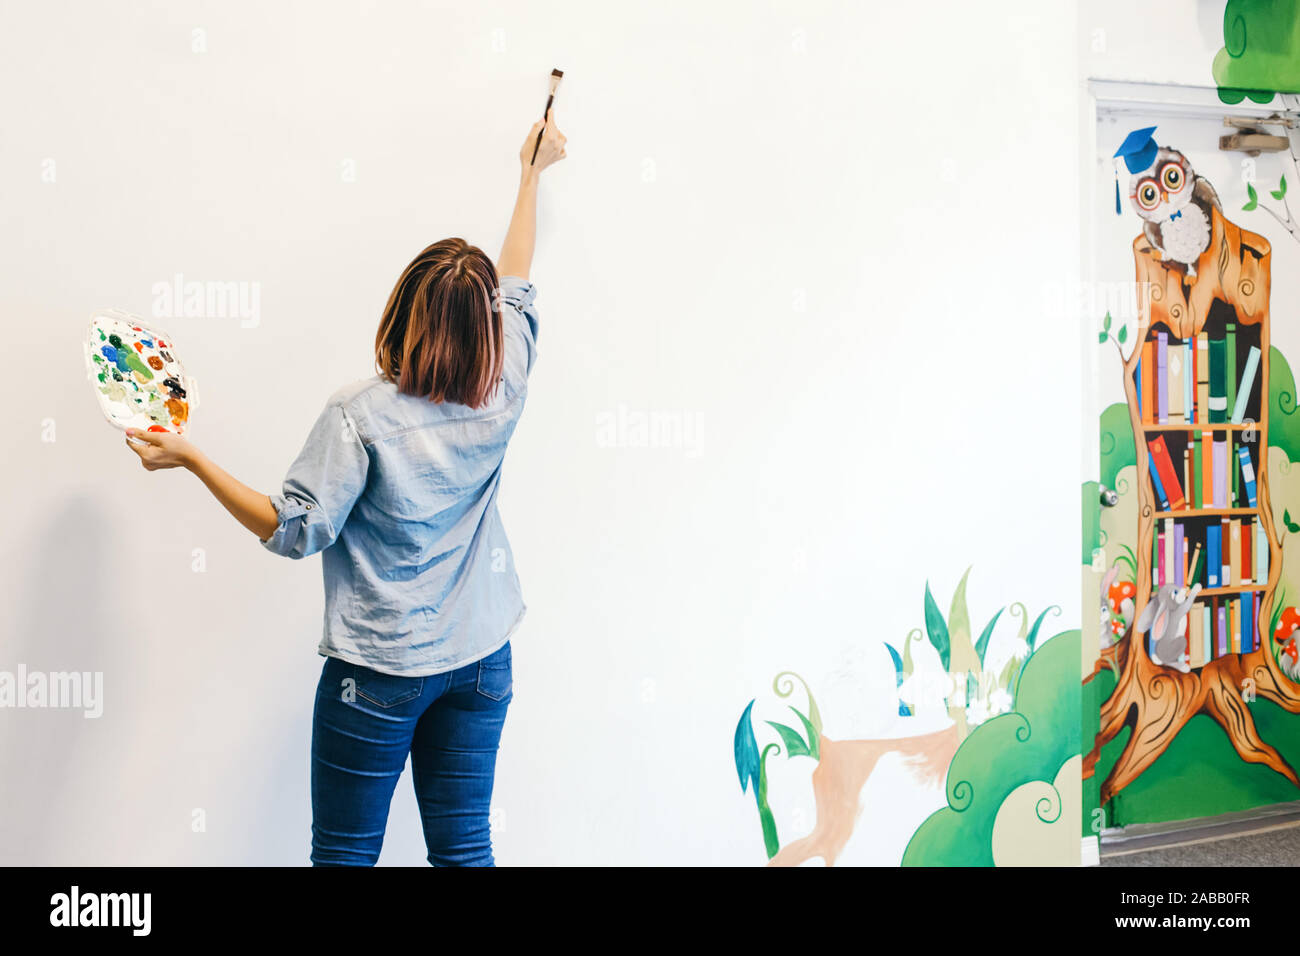 Lifestyle creative hobby and freelance artistic work side job concept. Caucasian woman artist hand painting murals on walls indoor at apartment or stu Stock Photo